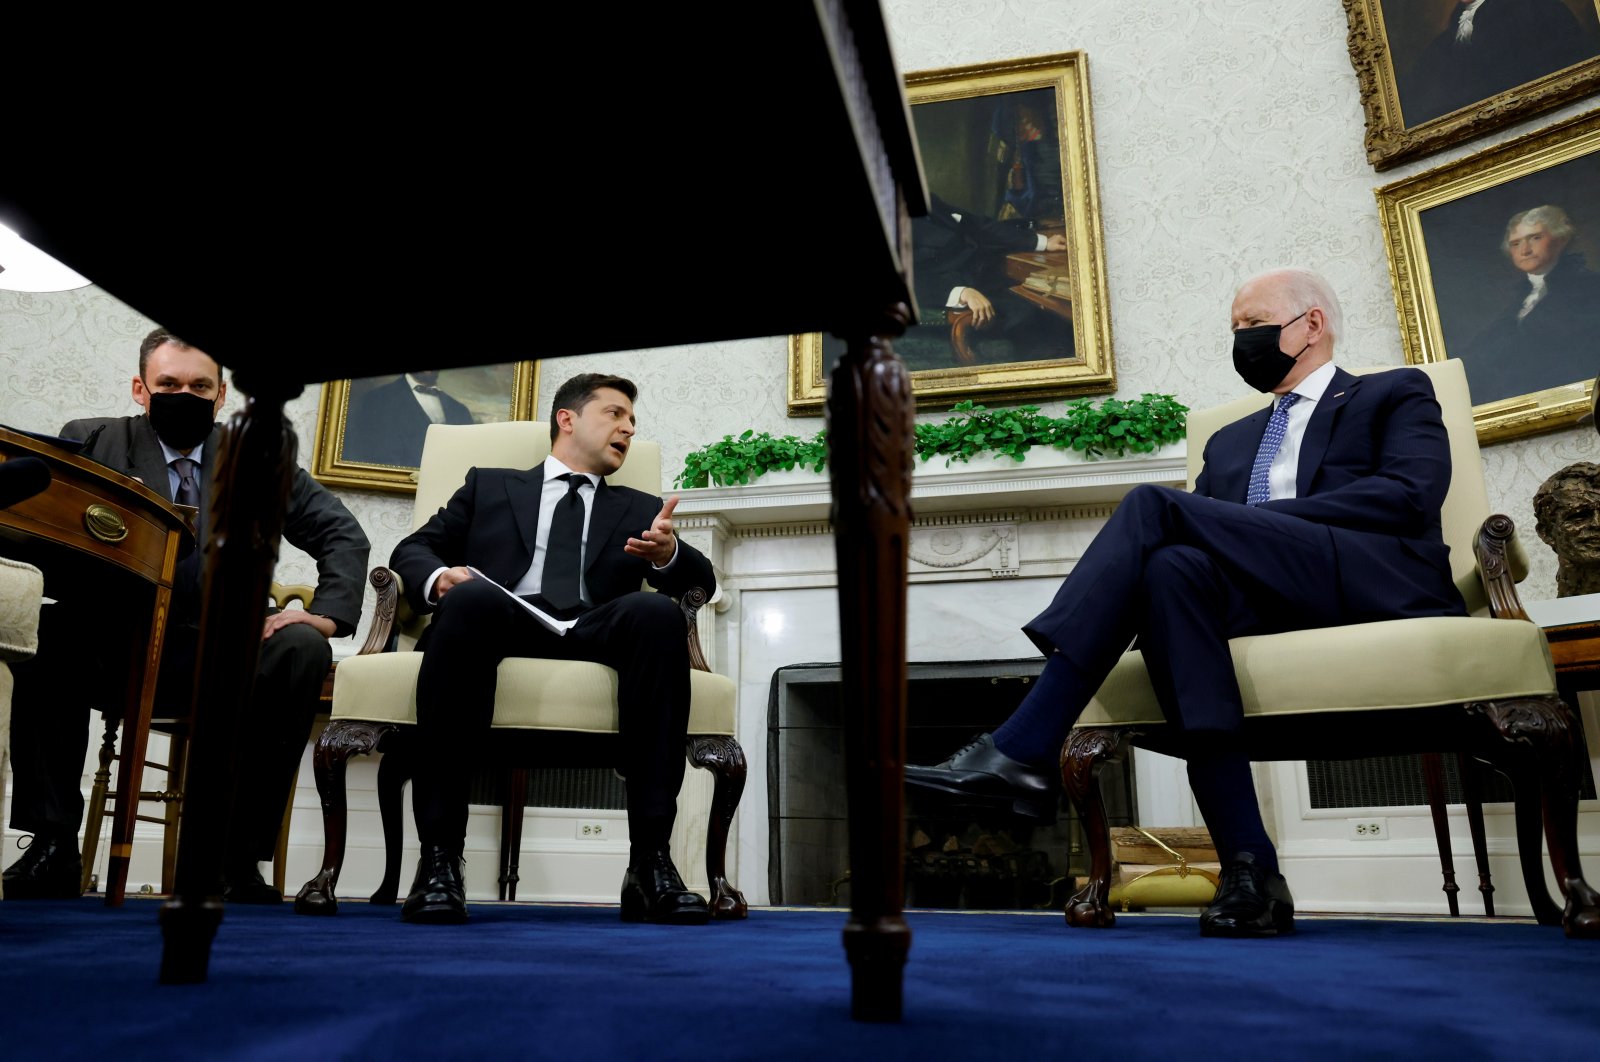 Ukraine's President Volodymyr Zelenskyy speaks during a meeting with U.S. President Joe Biden in the Oval Office at the White House in Washington, U.S., Sept. 1, 2021. (Reuters Photo)